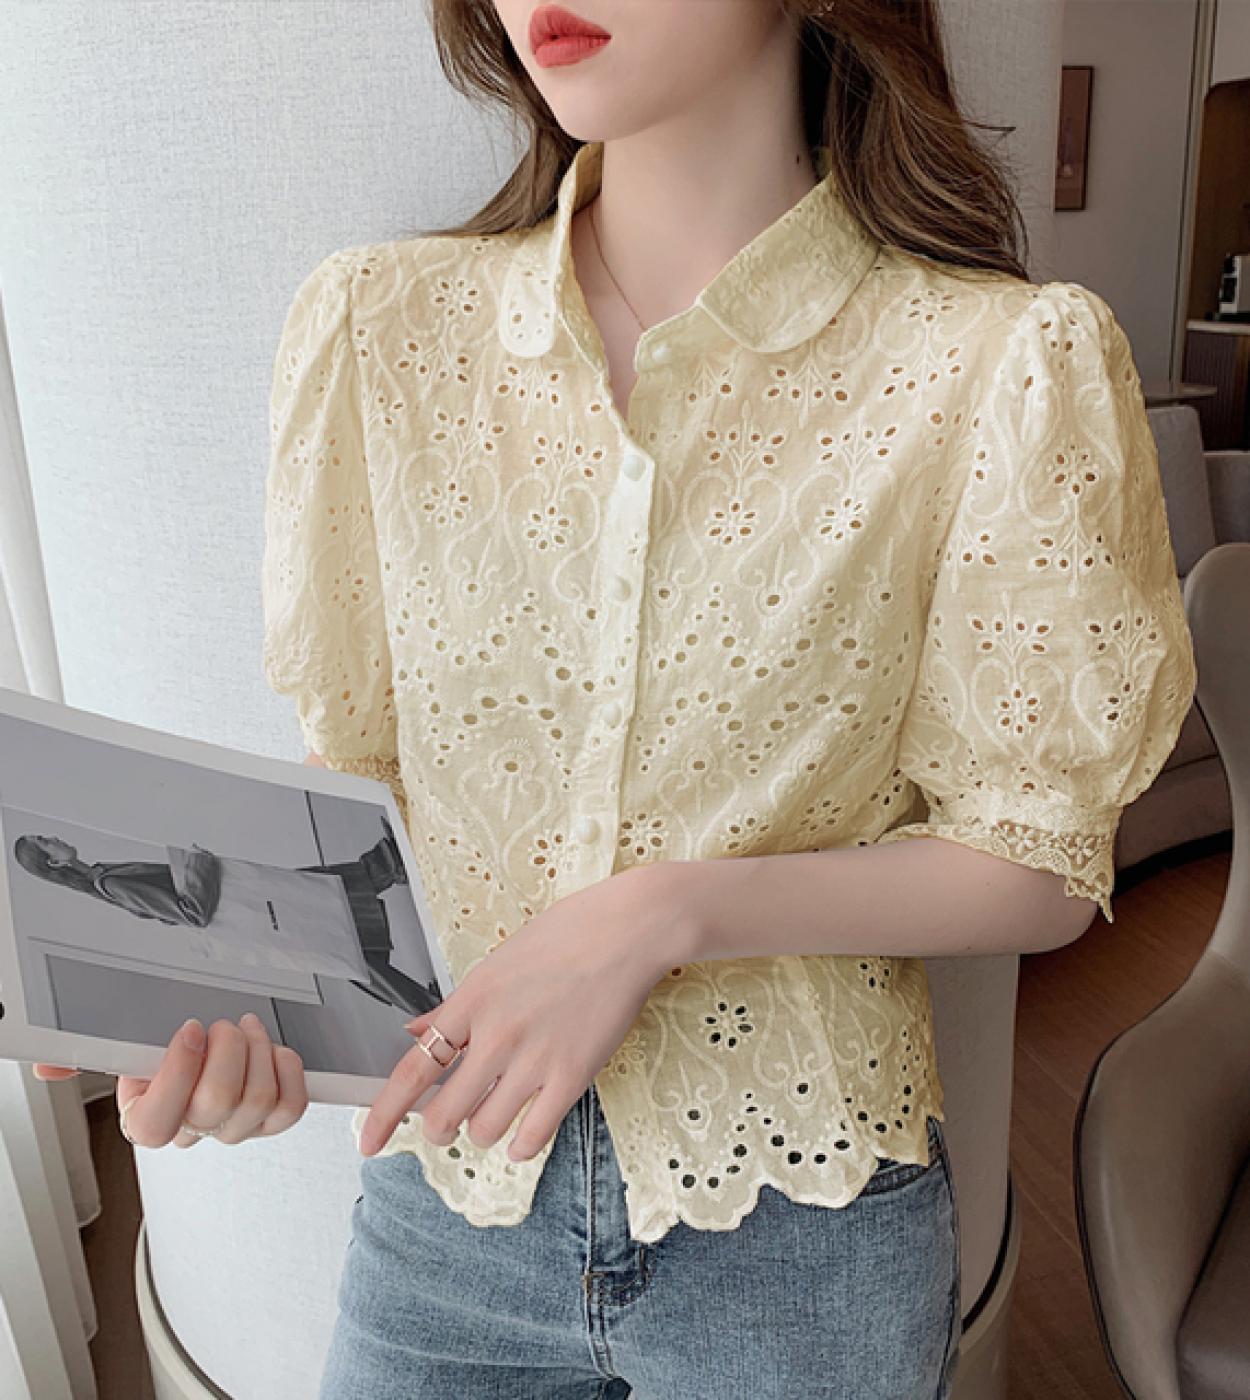 2023 Summer New Arrival: High-quality And Durable Women's Short Sleeve Tops  With Hollow-out Design And Square Neckline, Perfect For Casual Wear And Cr